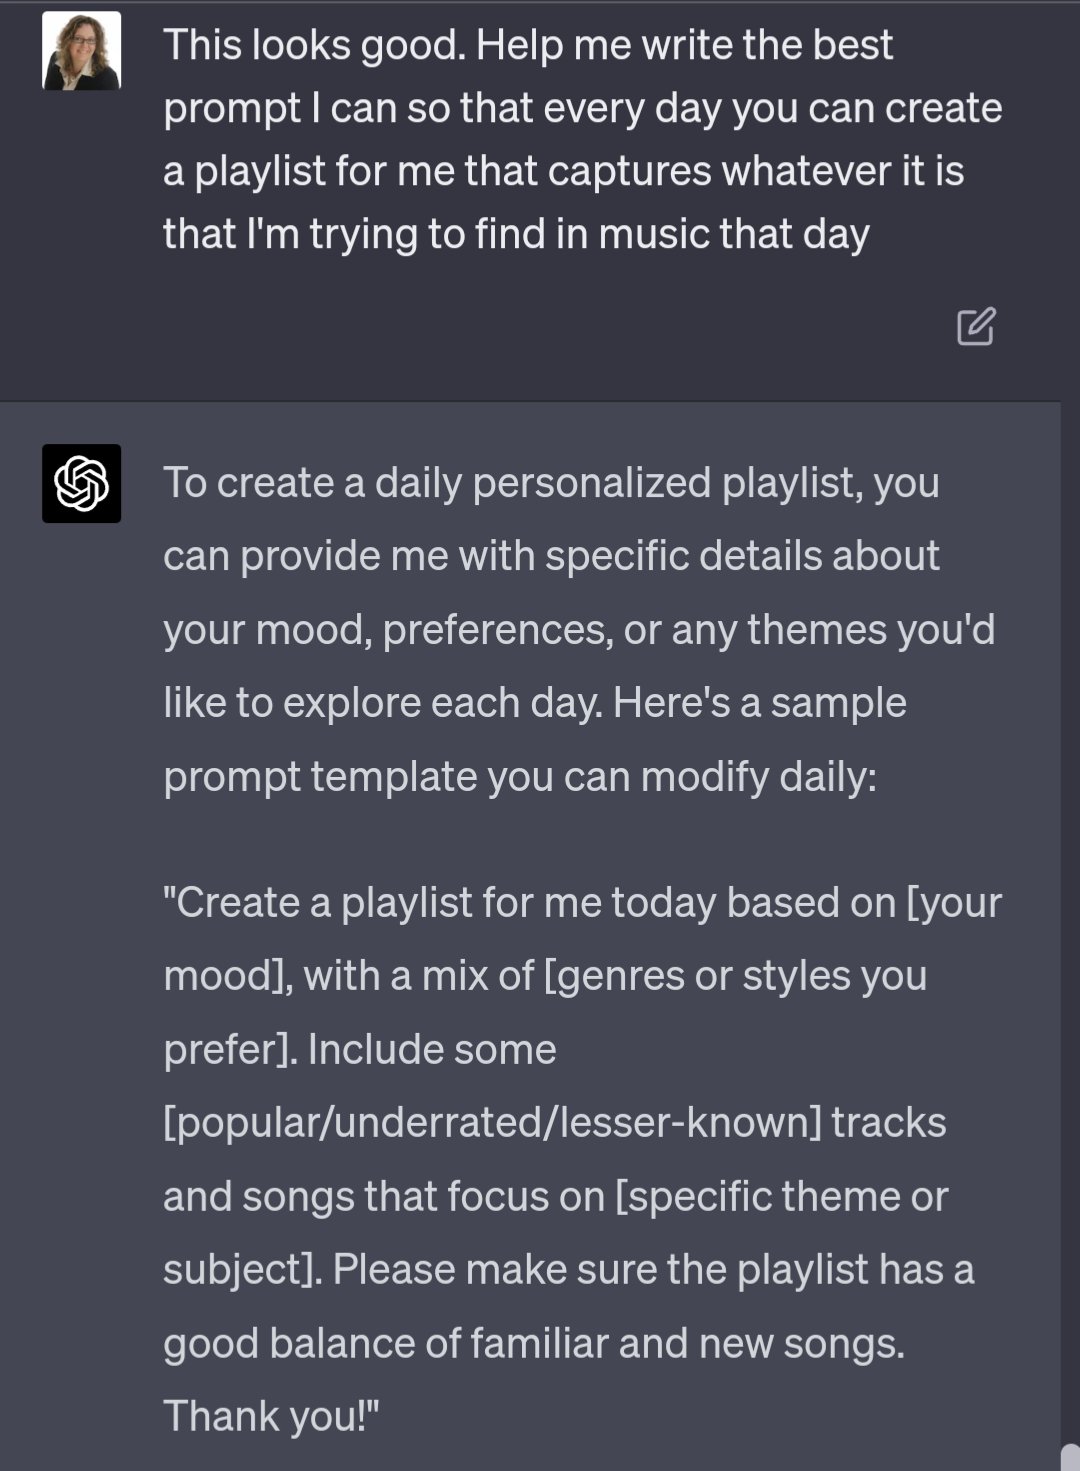 How to curate a playlist based on specific themes or moods